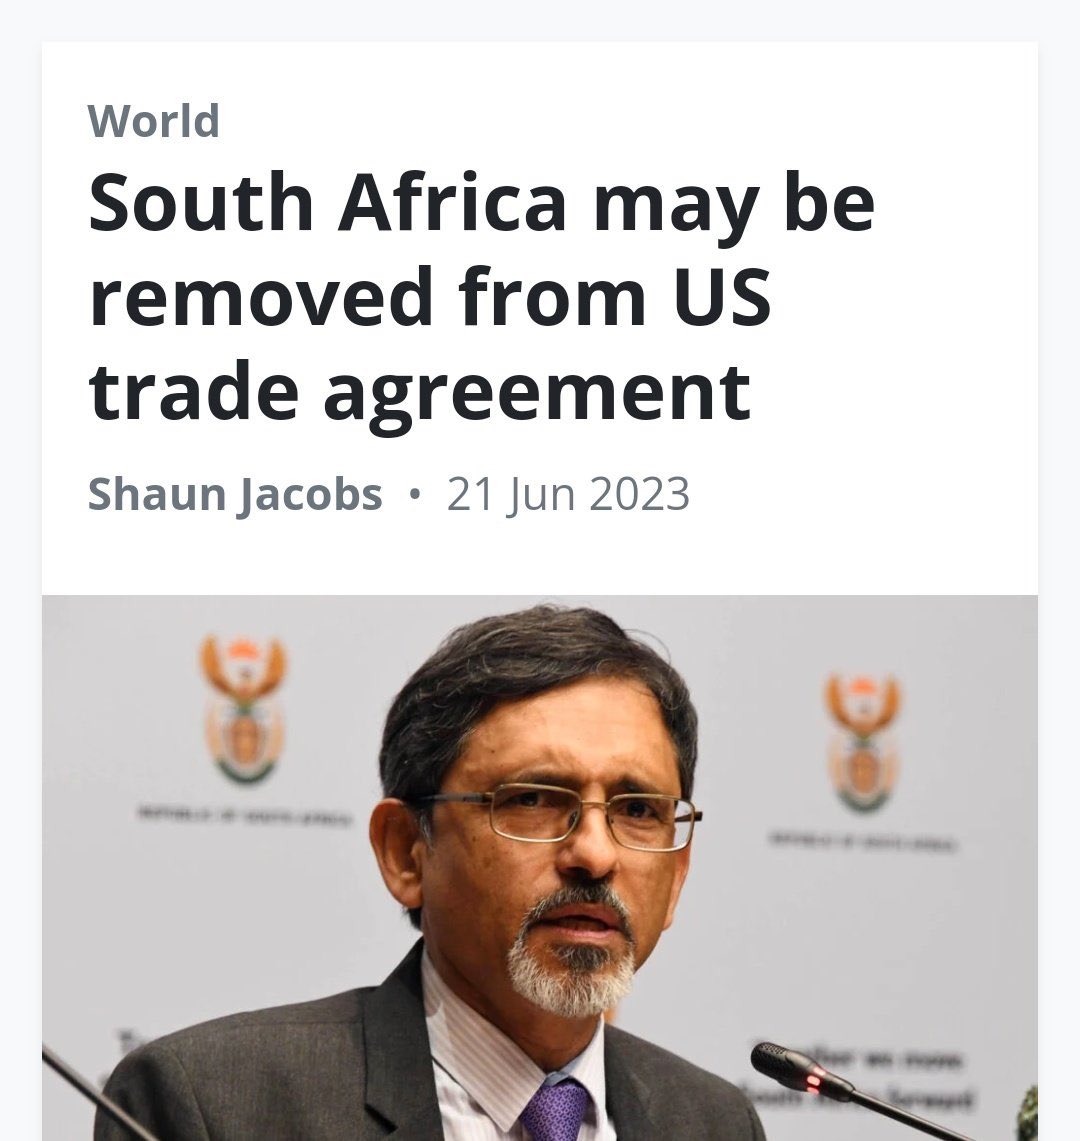 South Africa Has Trade Agreements With BRICS, We Really Will Be Ok

We Stand With Russia 🇷🇺